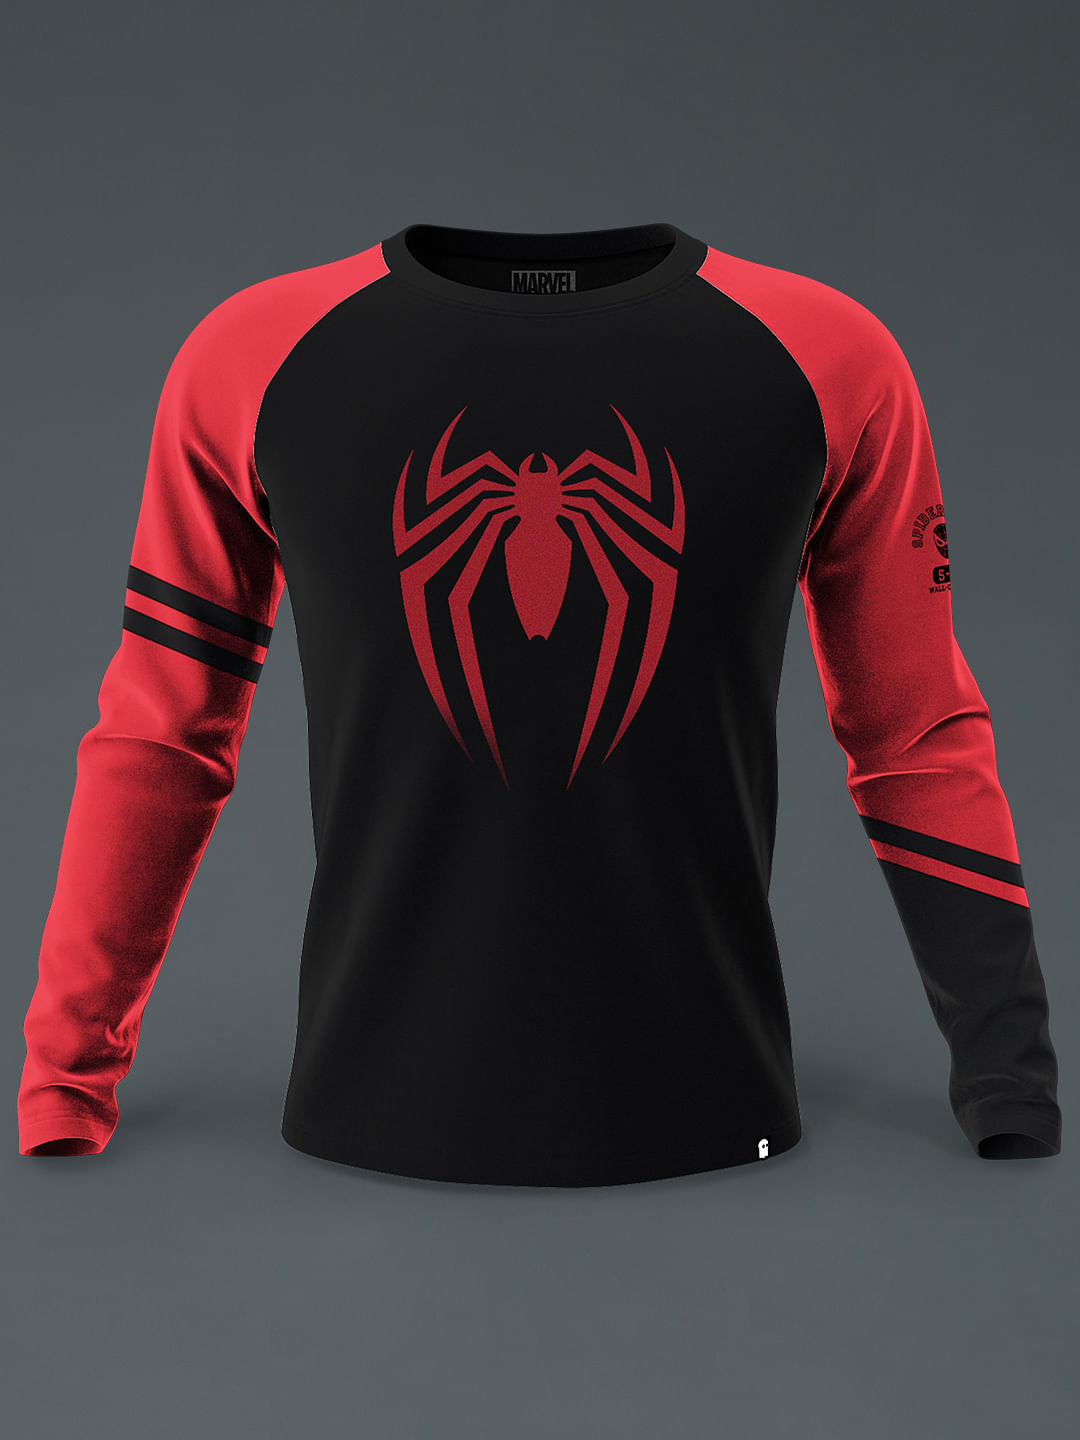 Buy Spider-Man: Web Crawler Full Sleeve T-shirts online at The Souled Store.